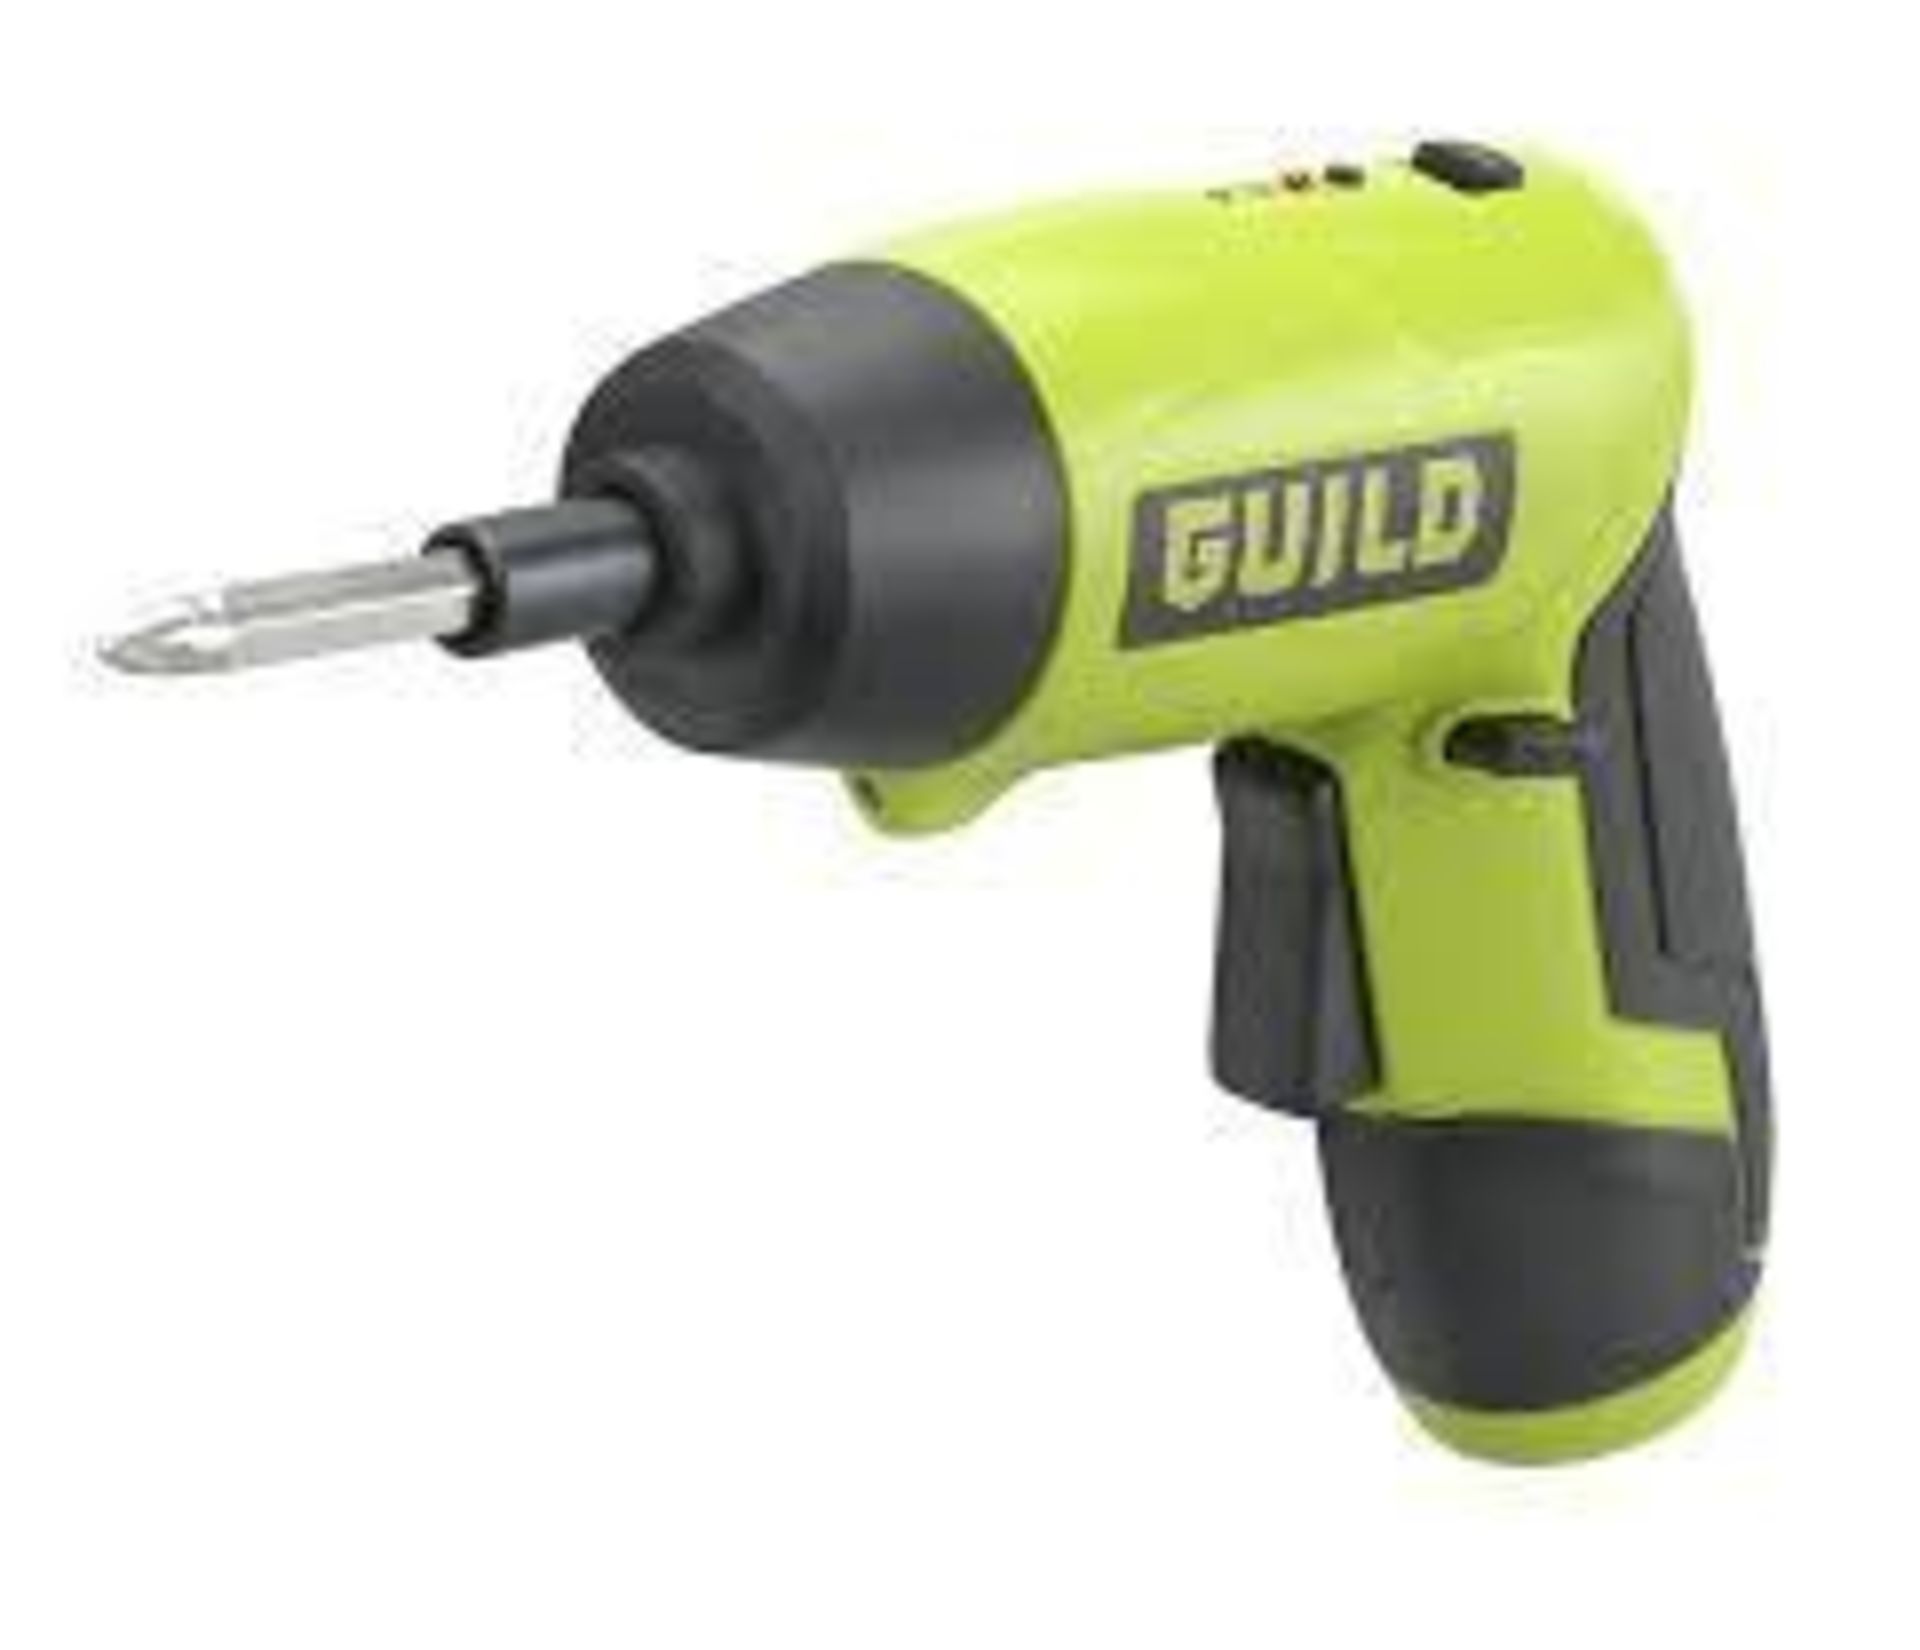 GUILD 3.6V FASTCHARGE Li-Ion Screwdriver with Charger - £20.00 RRP